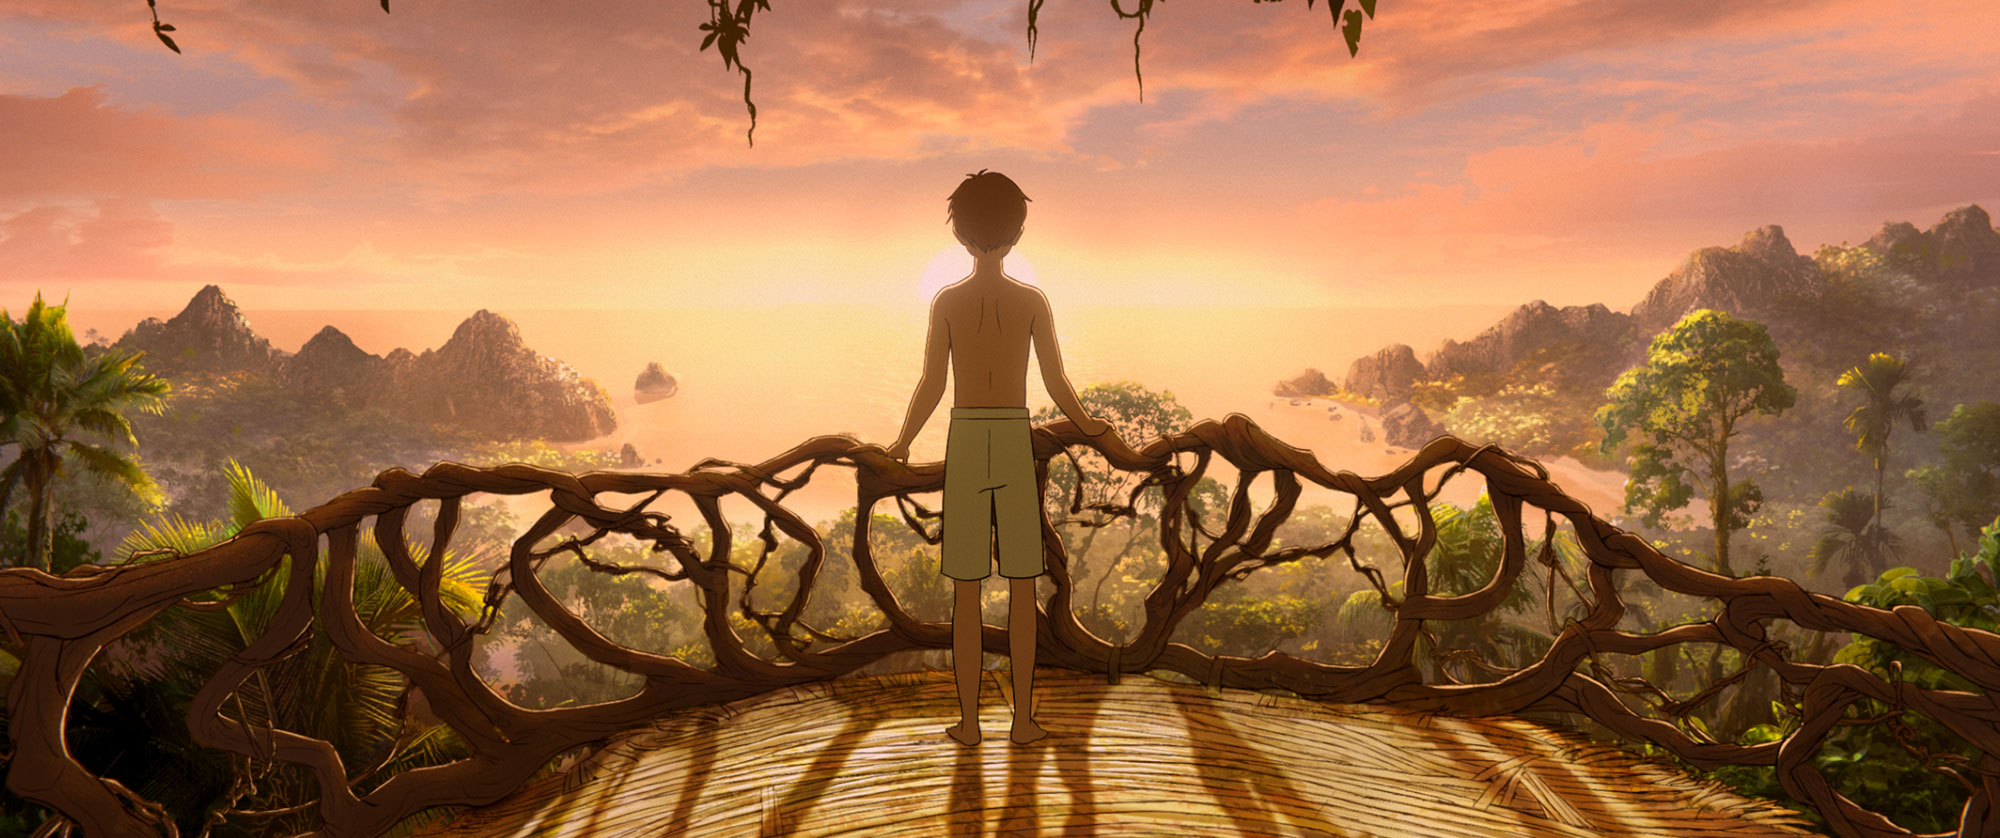 <p>Michael sees the view from Kensuke's treehouse for the first time</p>
